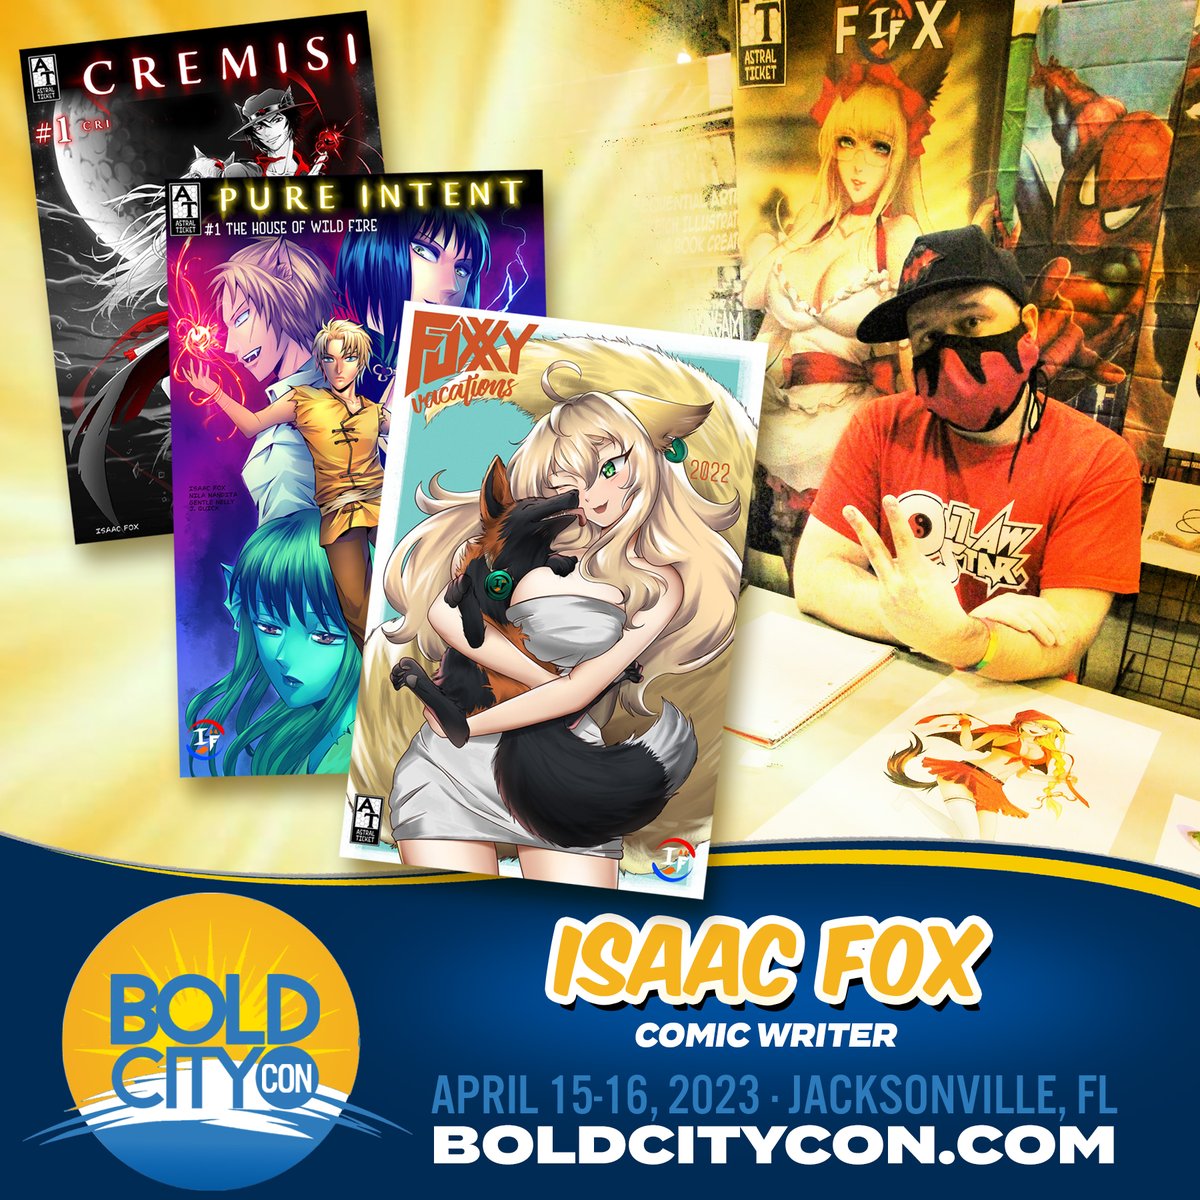 Come by Bold City Con this weekend and meet our creator, Isaac Fox with some con-exclusive deals!

#convention #jacksonville #jacksonvilleflorida #boldcitycon #anime #convention #floridacon #northflorida #firstcoast #comicbooks #comicart #comicartist #indie #indiecomics